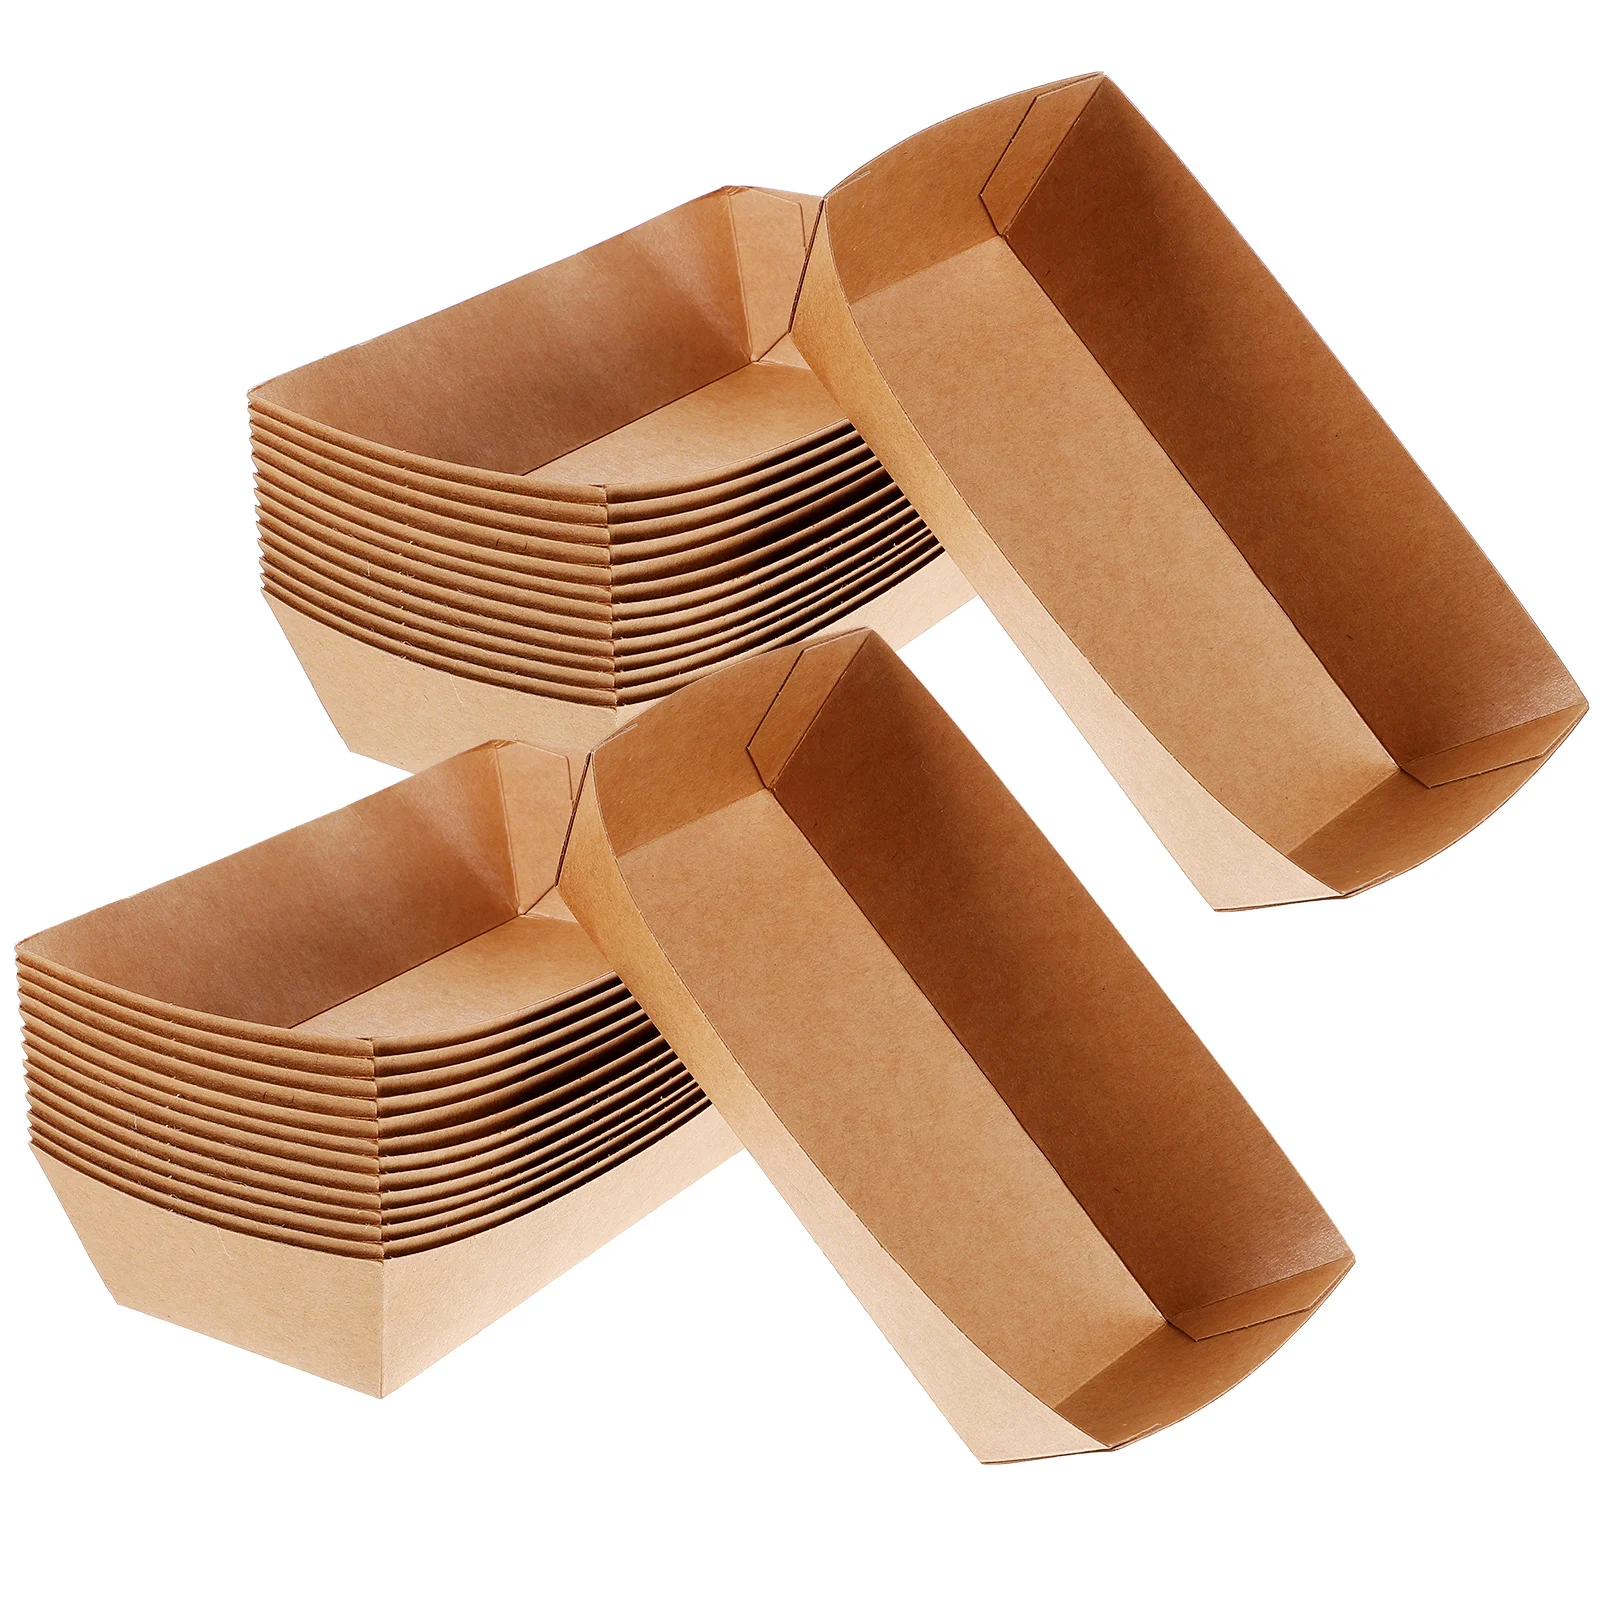 

100 Pcs Kraft Paper Shipping Box Sushi Serving Tray Appetizer Trays Disposable Boat Platter Appetizers